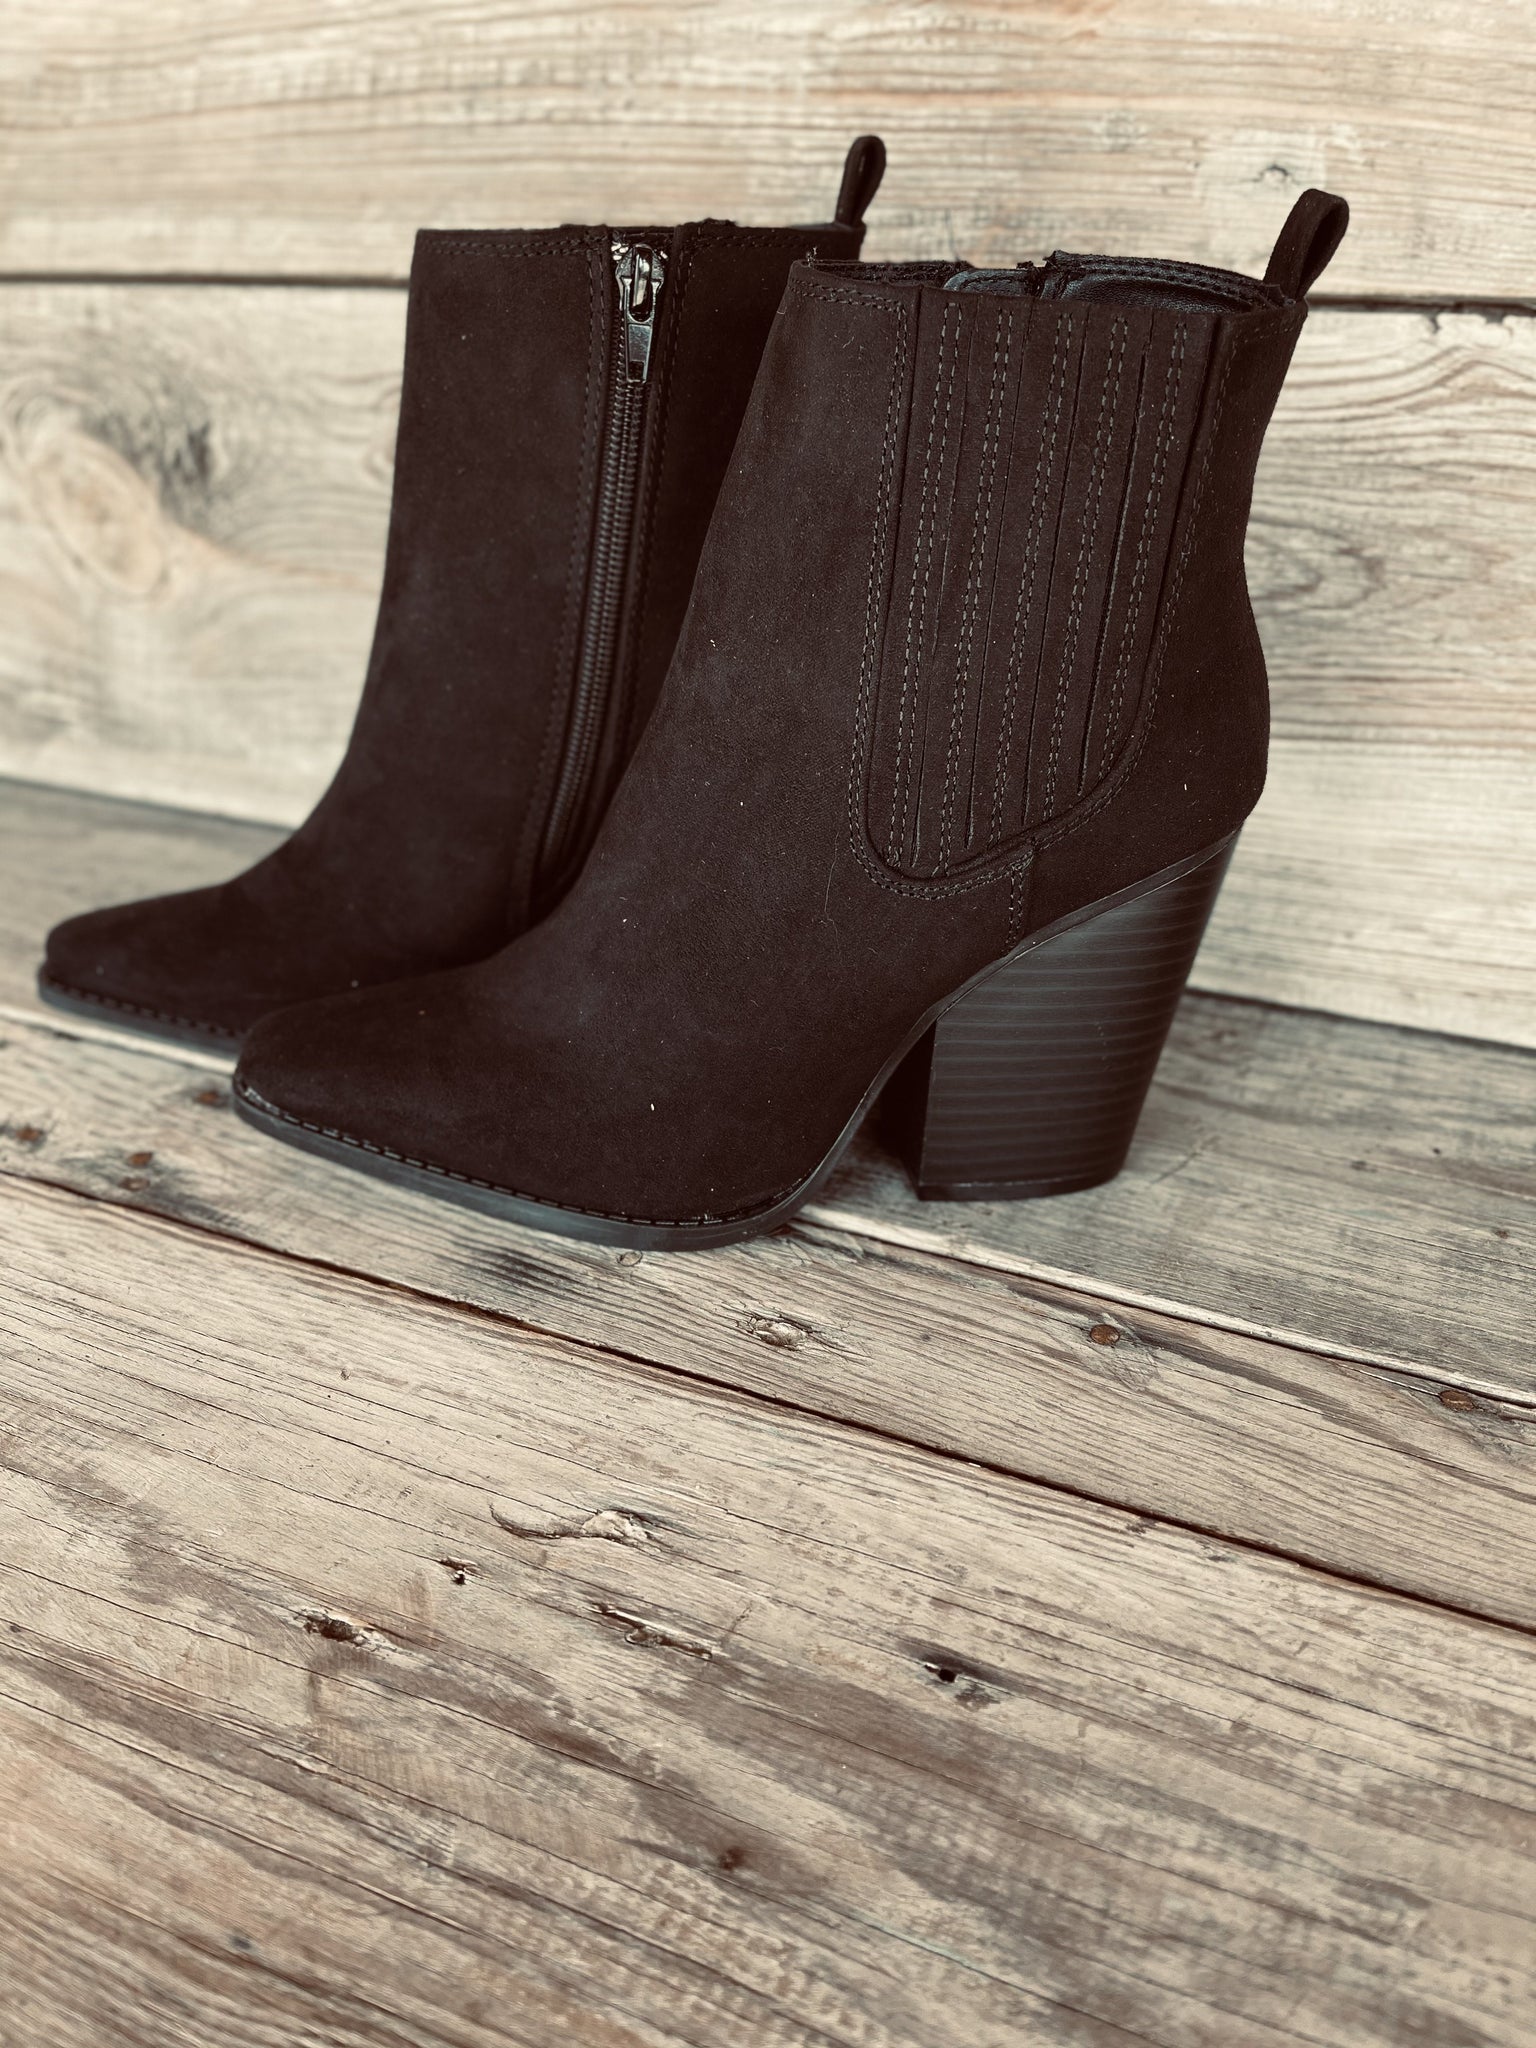 Ally Black Booties